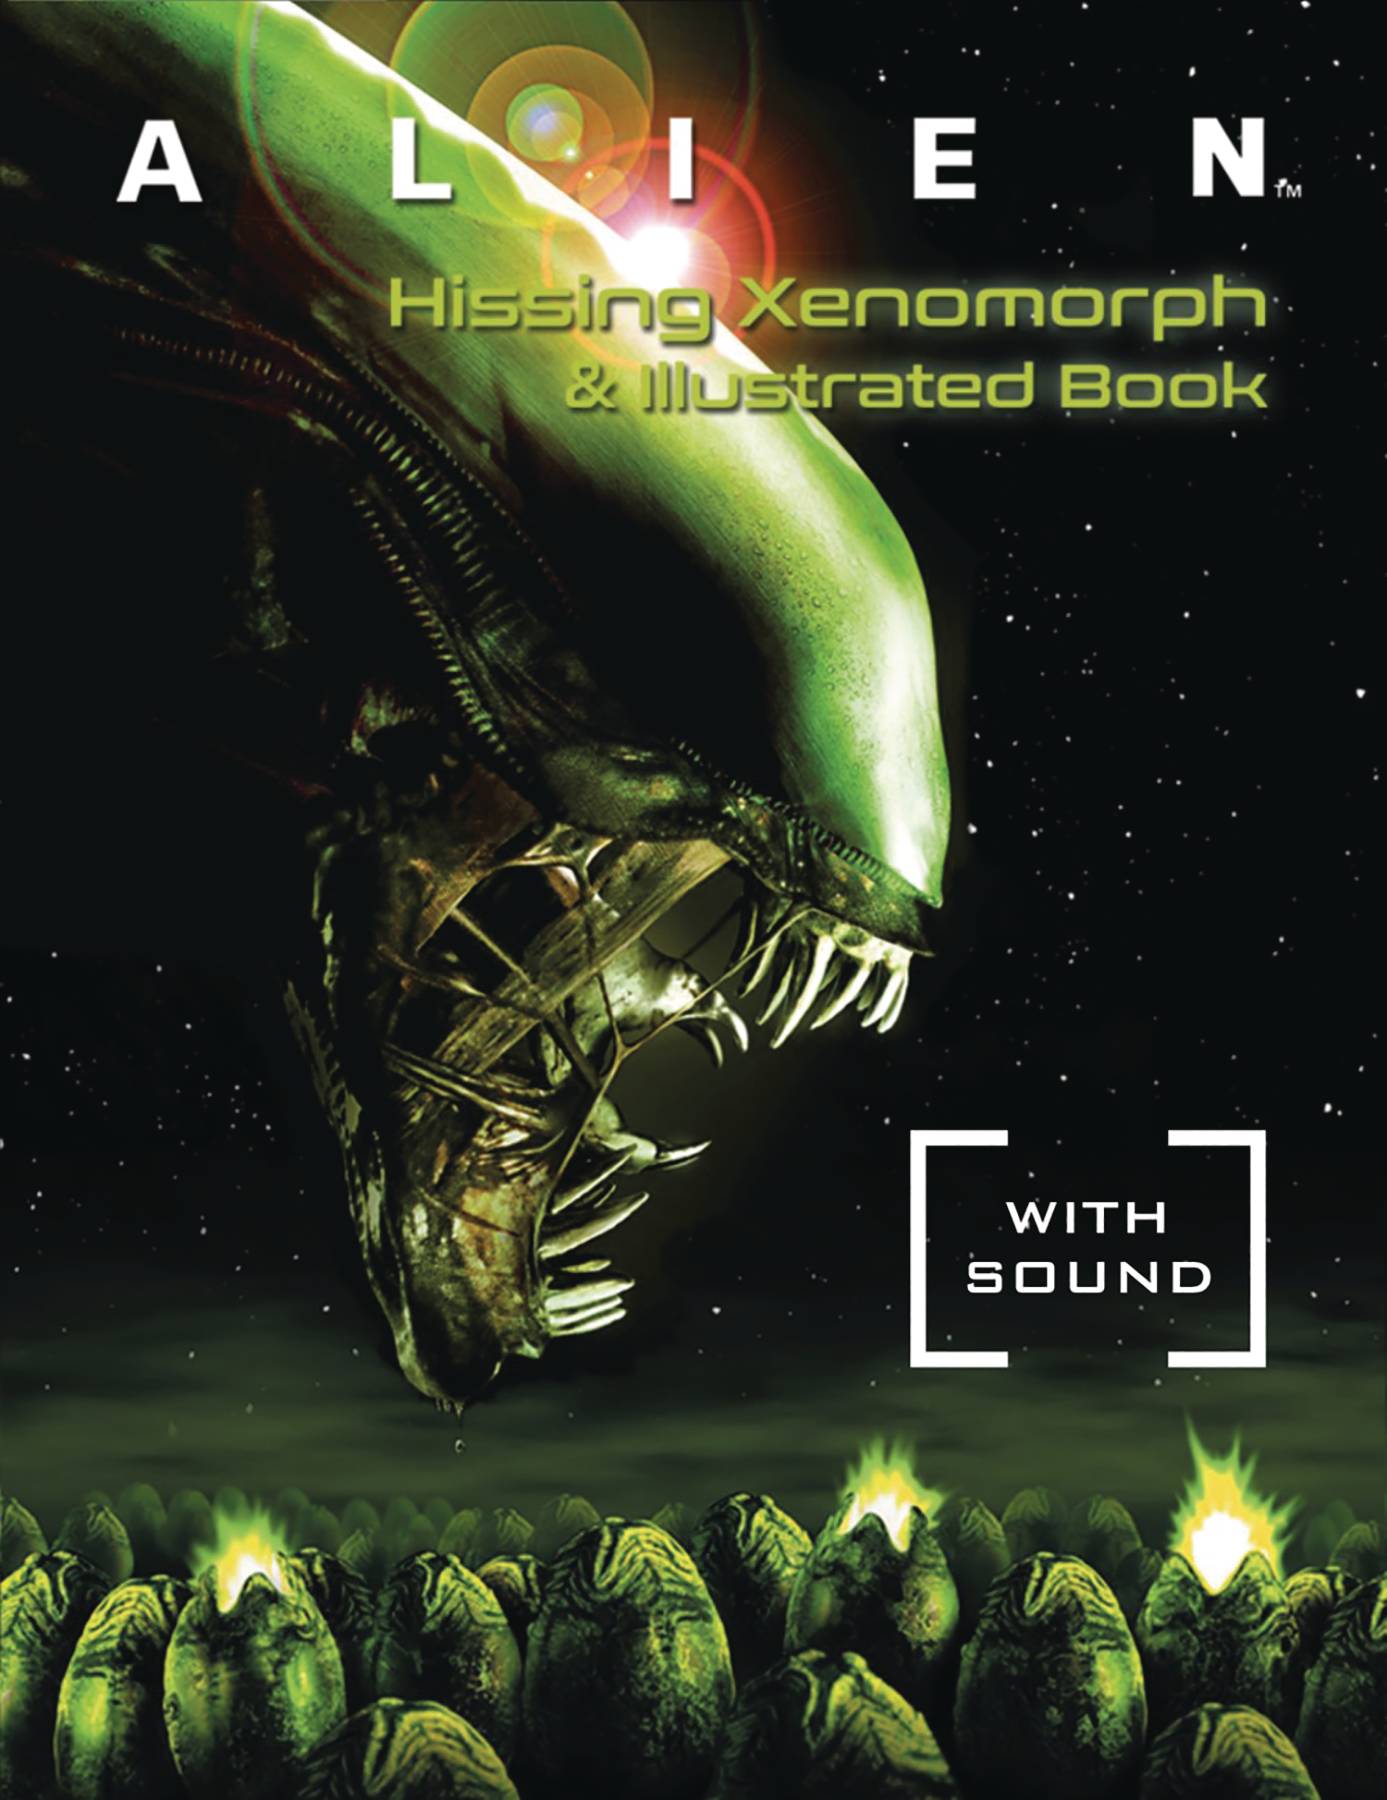 Alien Hissing Xenomorph & Illustrated Book Kit With Sound